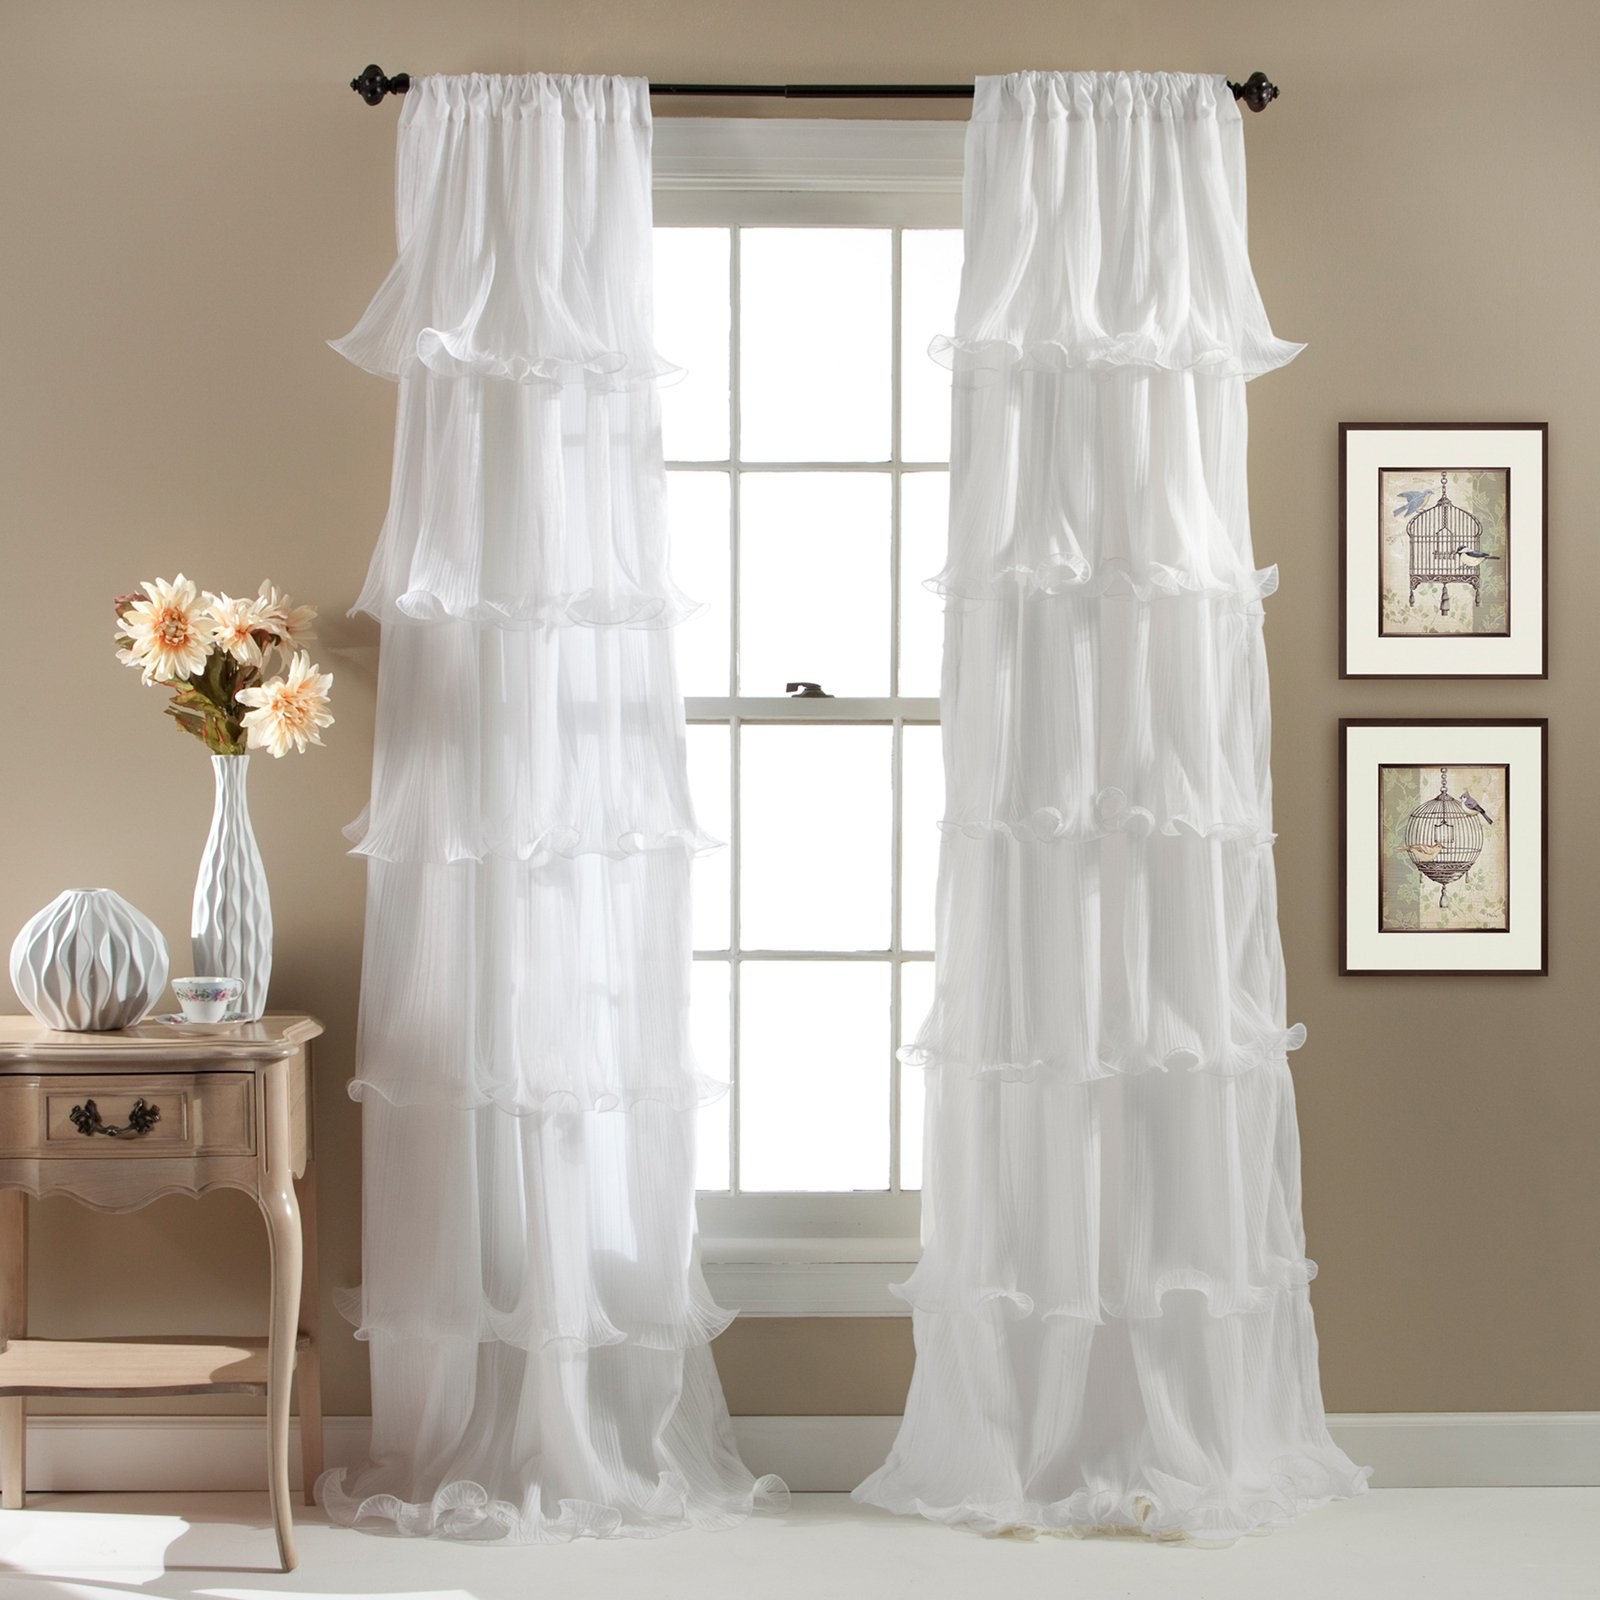 the white ruffle curtains over windows